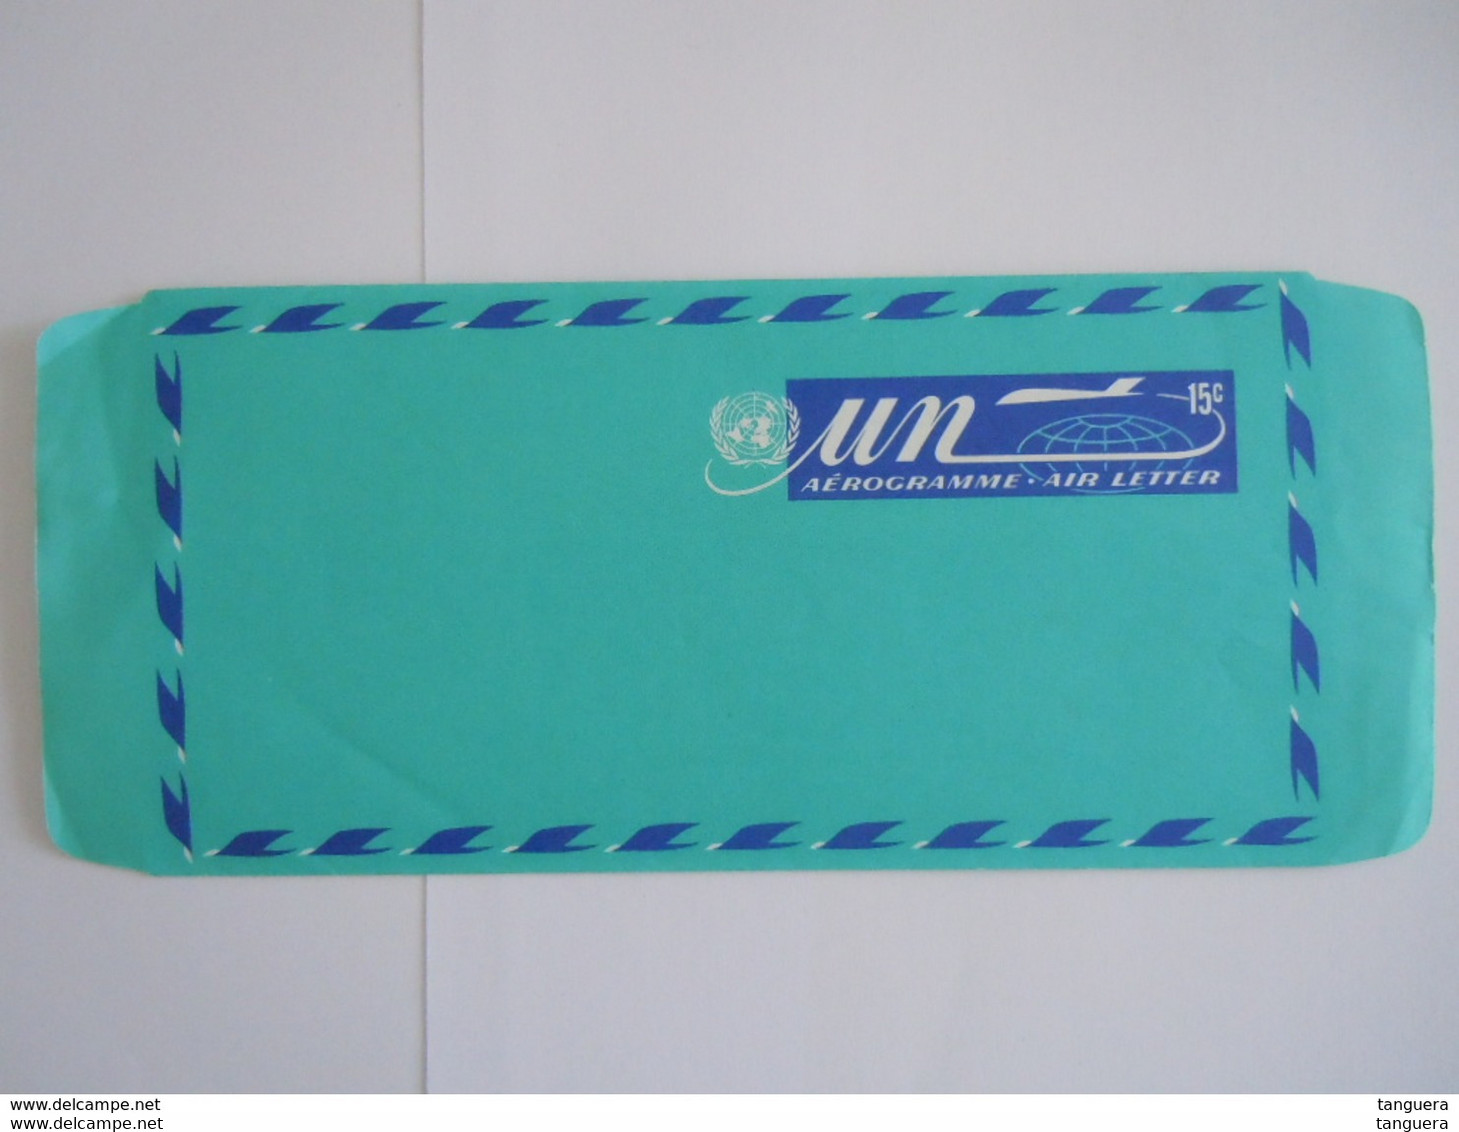 UN UNO United Nations New York Aerogramme Stationery Entier Postal 15c Mint - Airmail